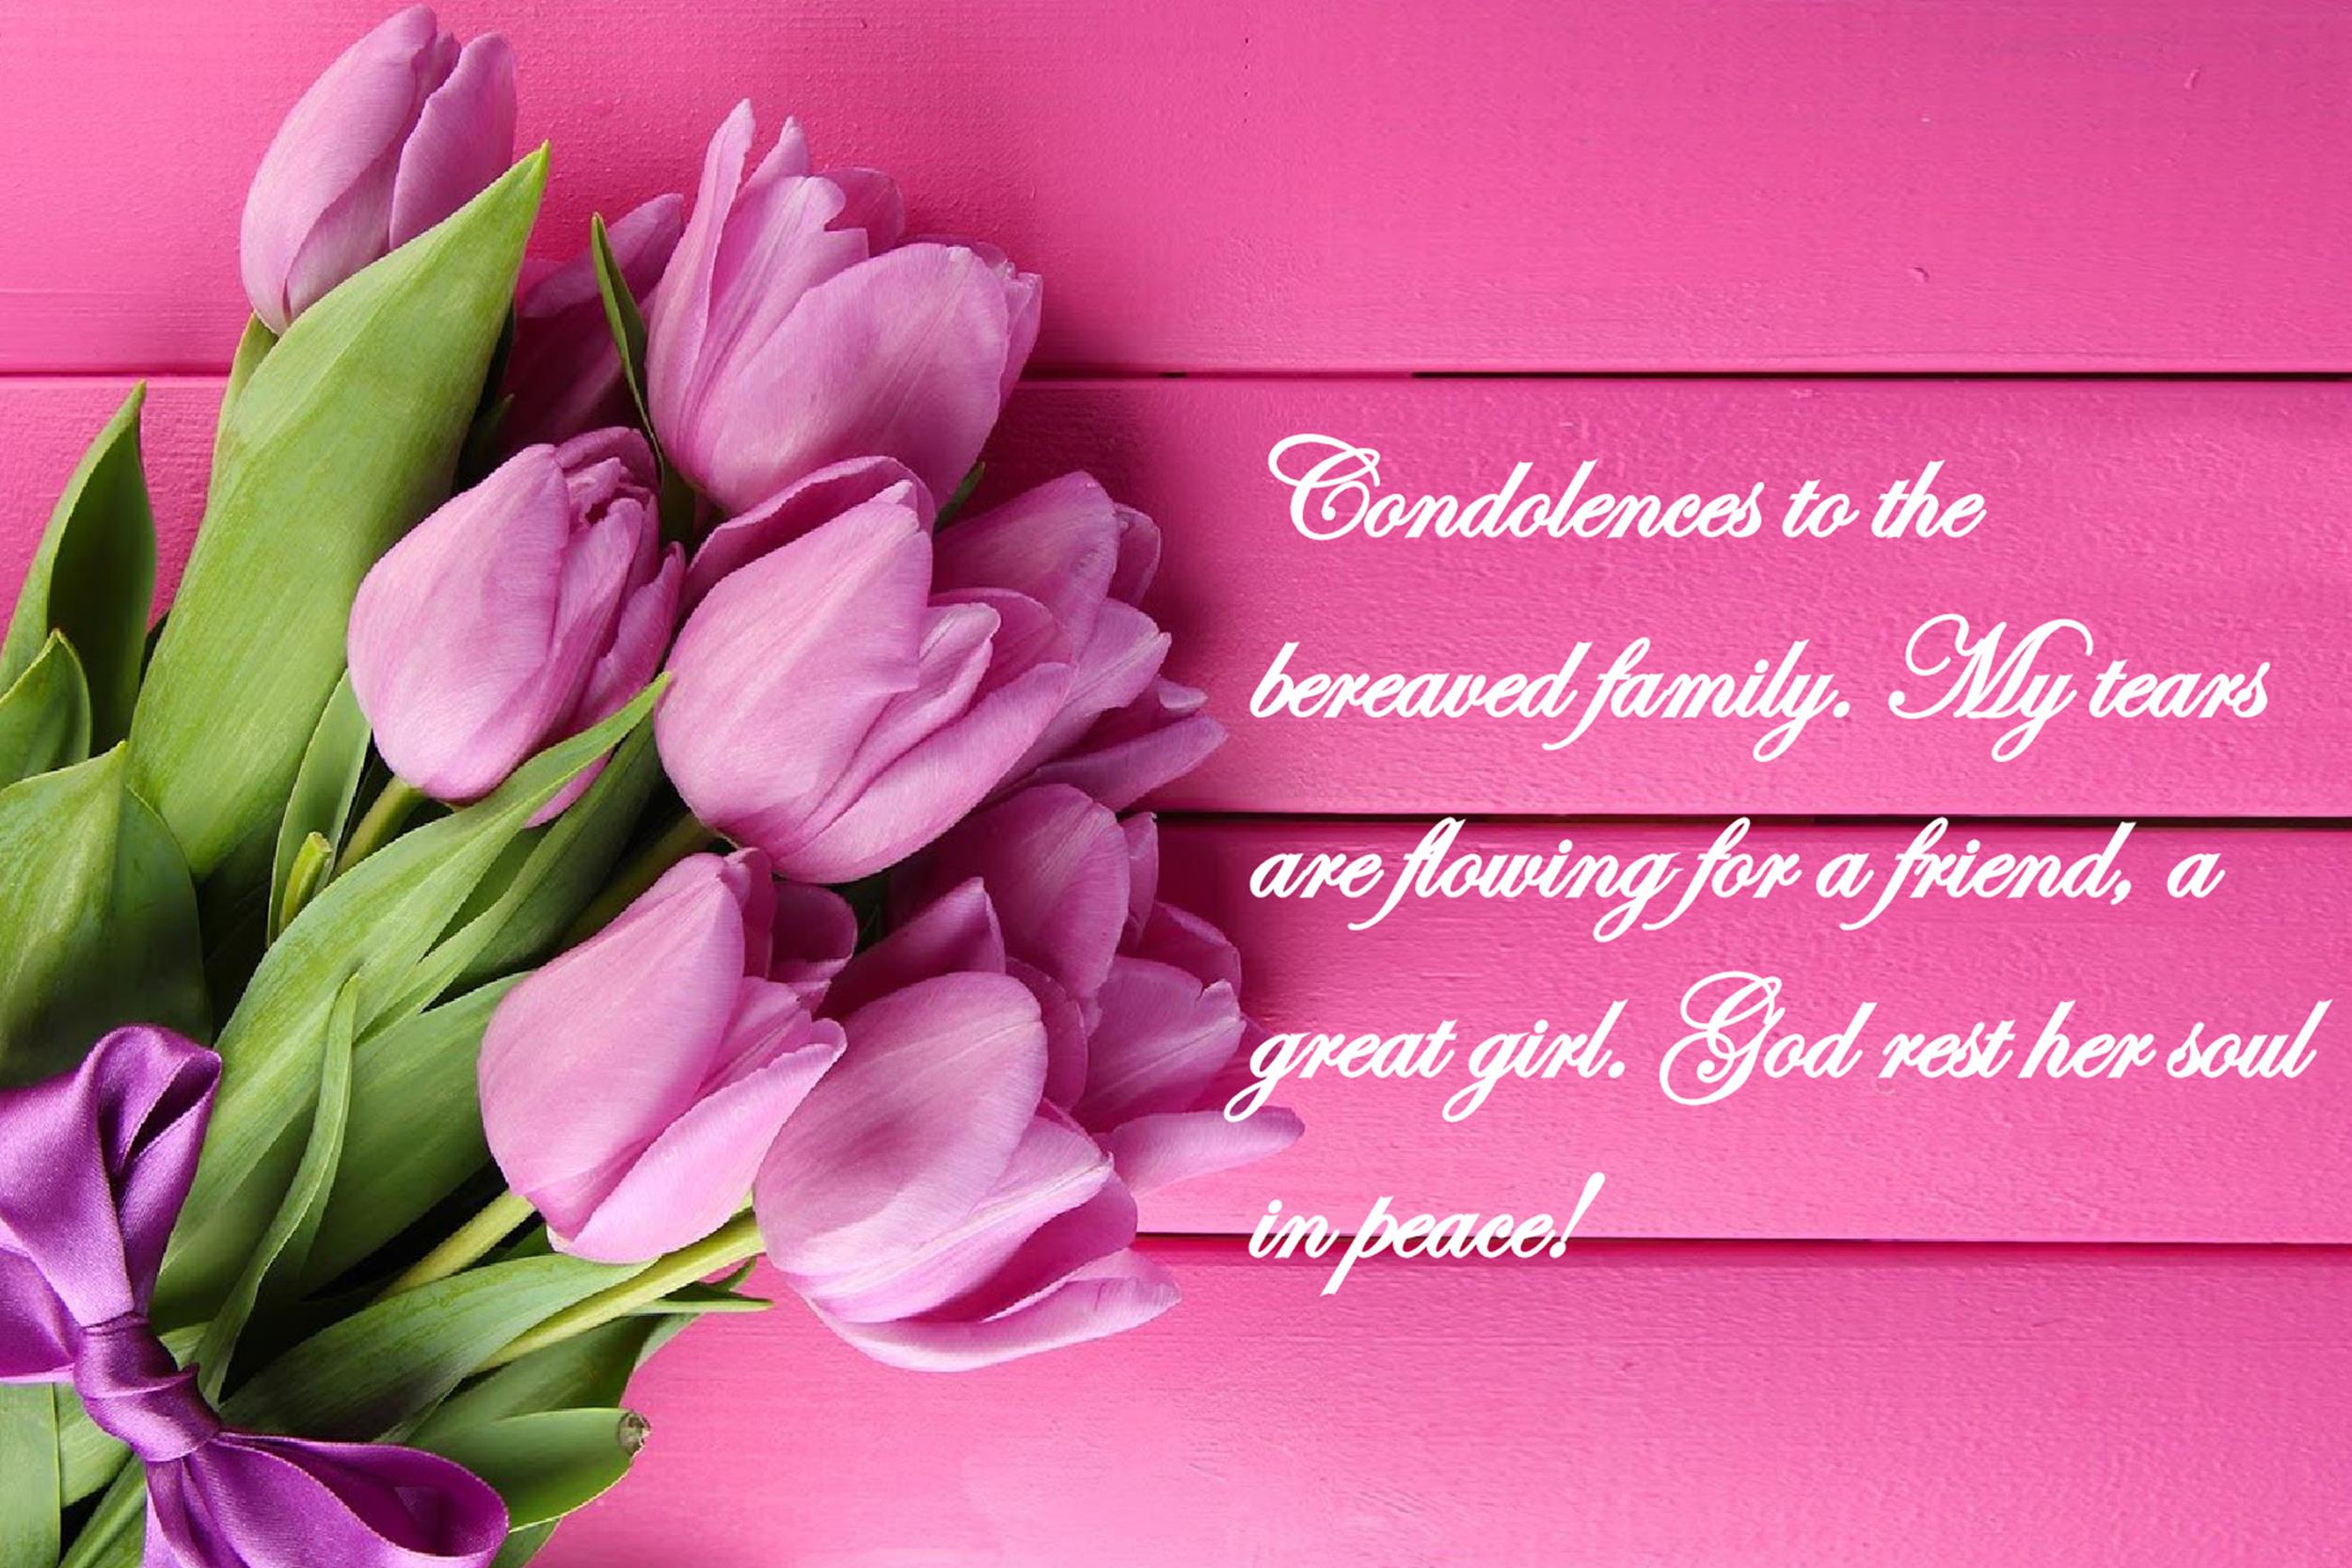 condolence-message-for-funeral-flowers-funeral-flowers-etiquette-doing-the-right-thing